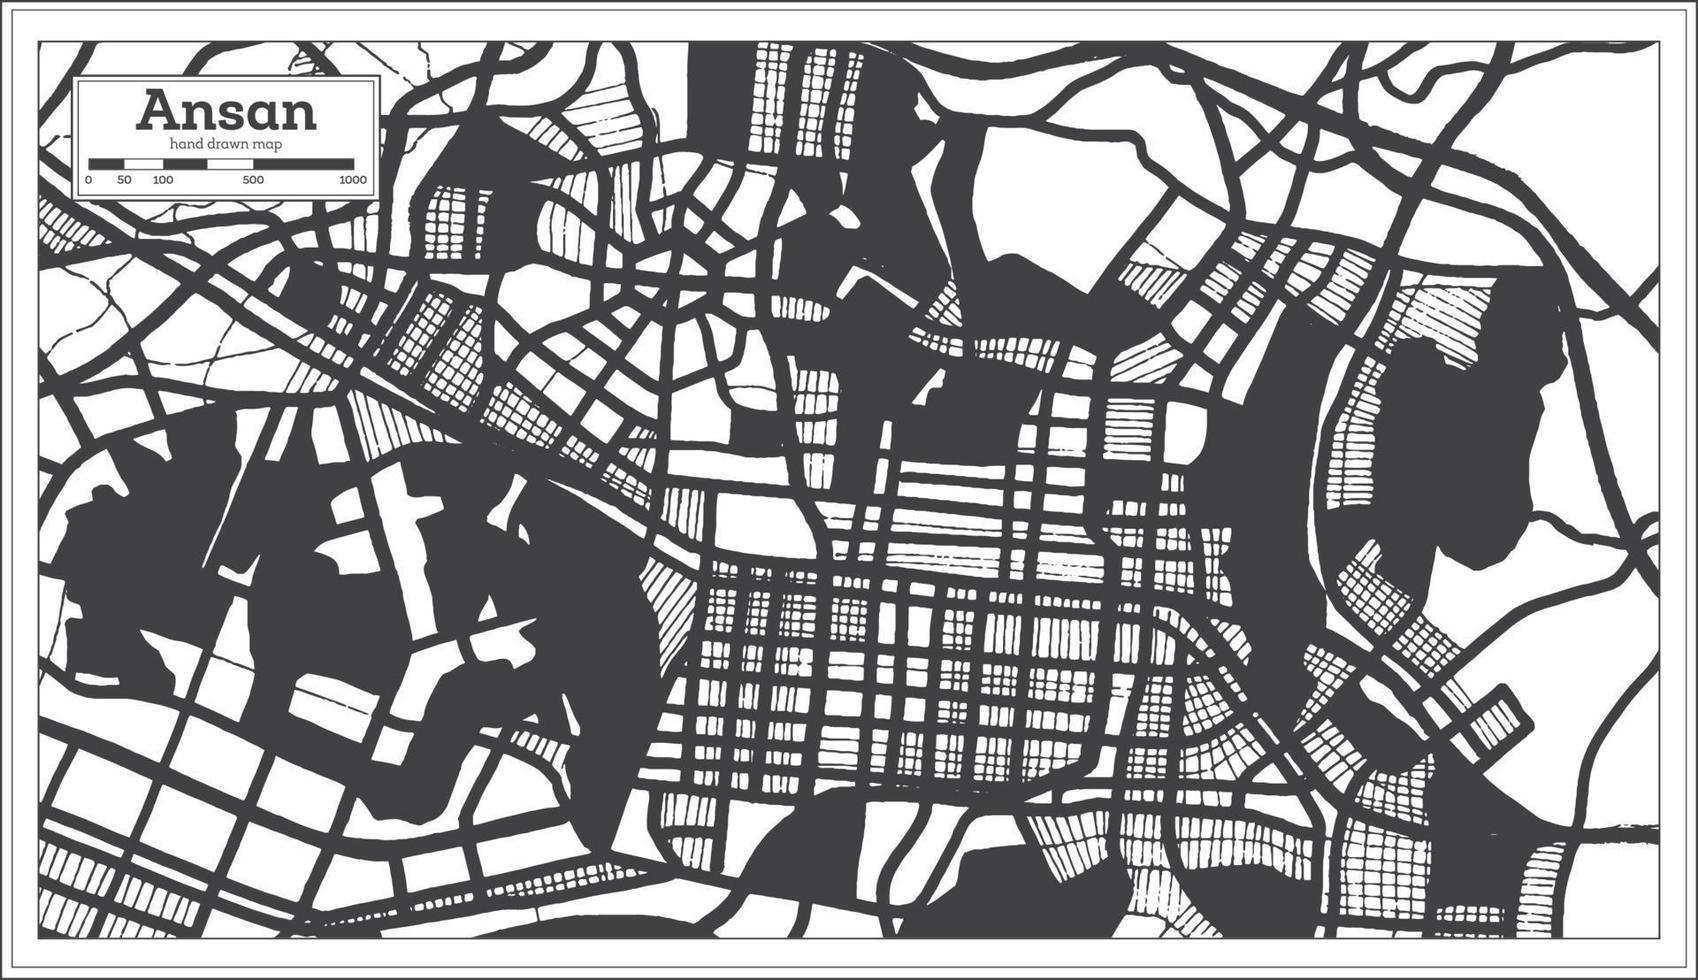 Ansan South Korea City Map in Black and White Color in Retro Style. vector